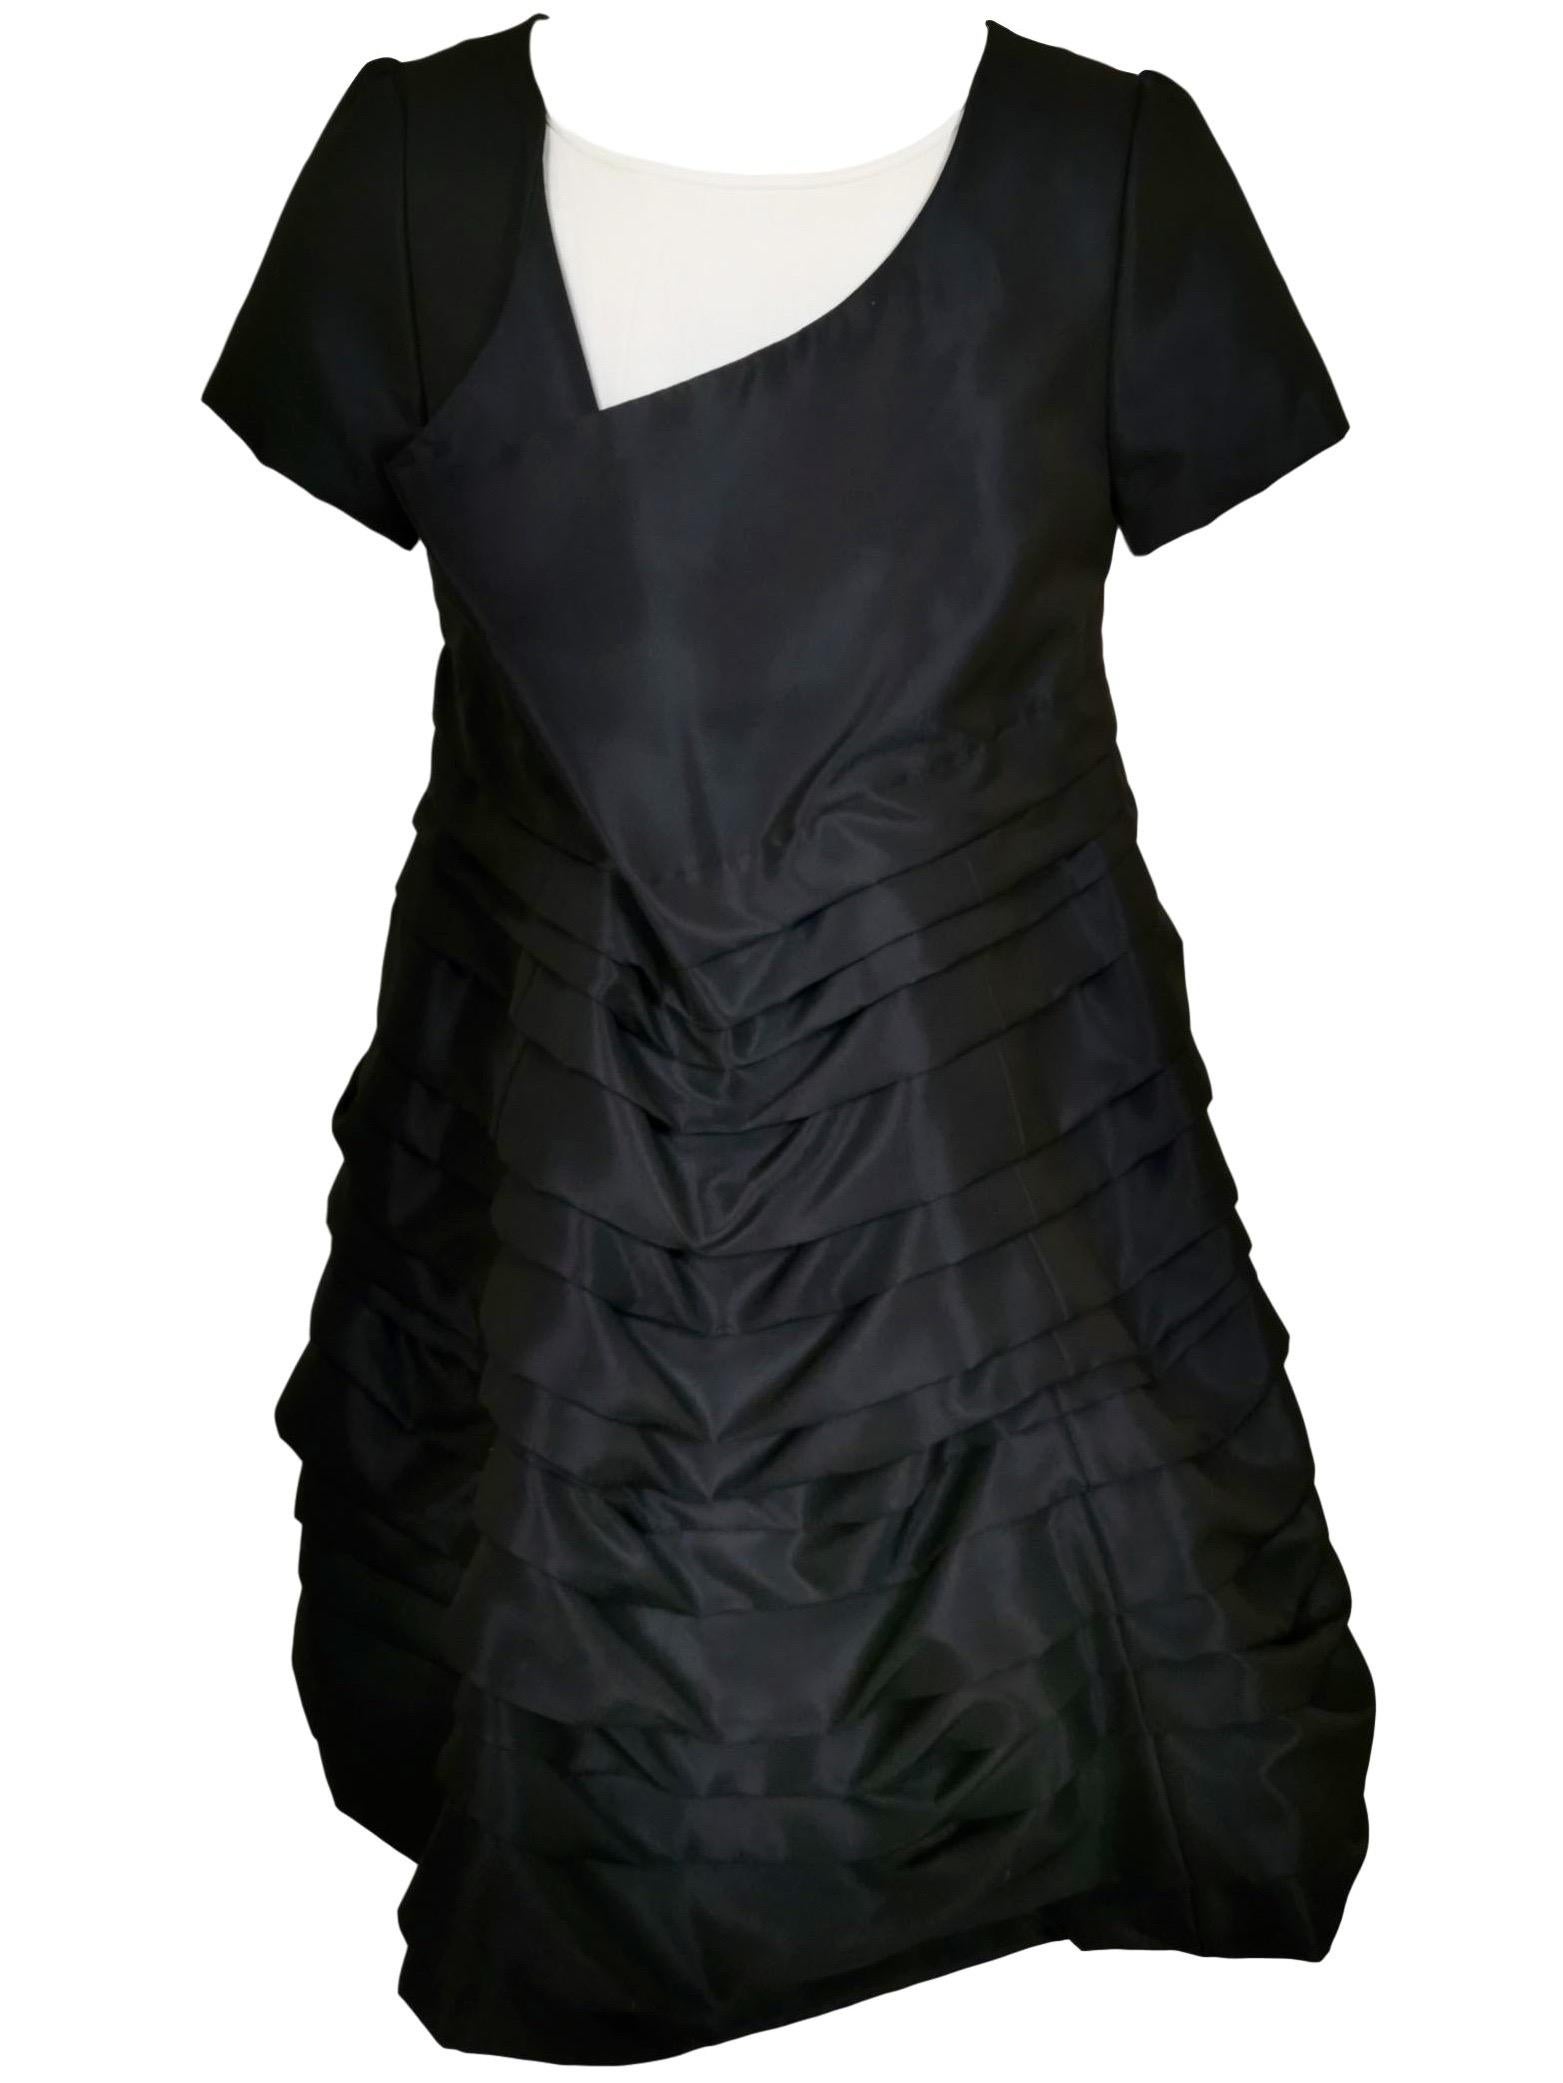 Comme des Garcons
1994 Pleated Dress with Back Flap Detail
Shown on Runway
Size M
